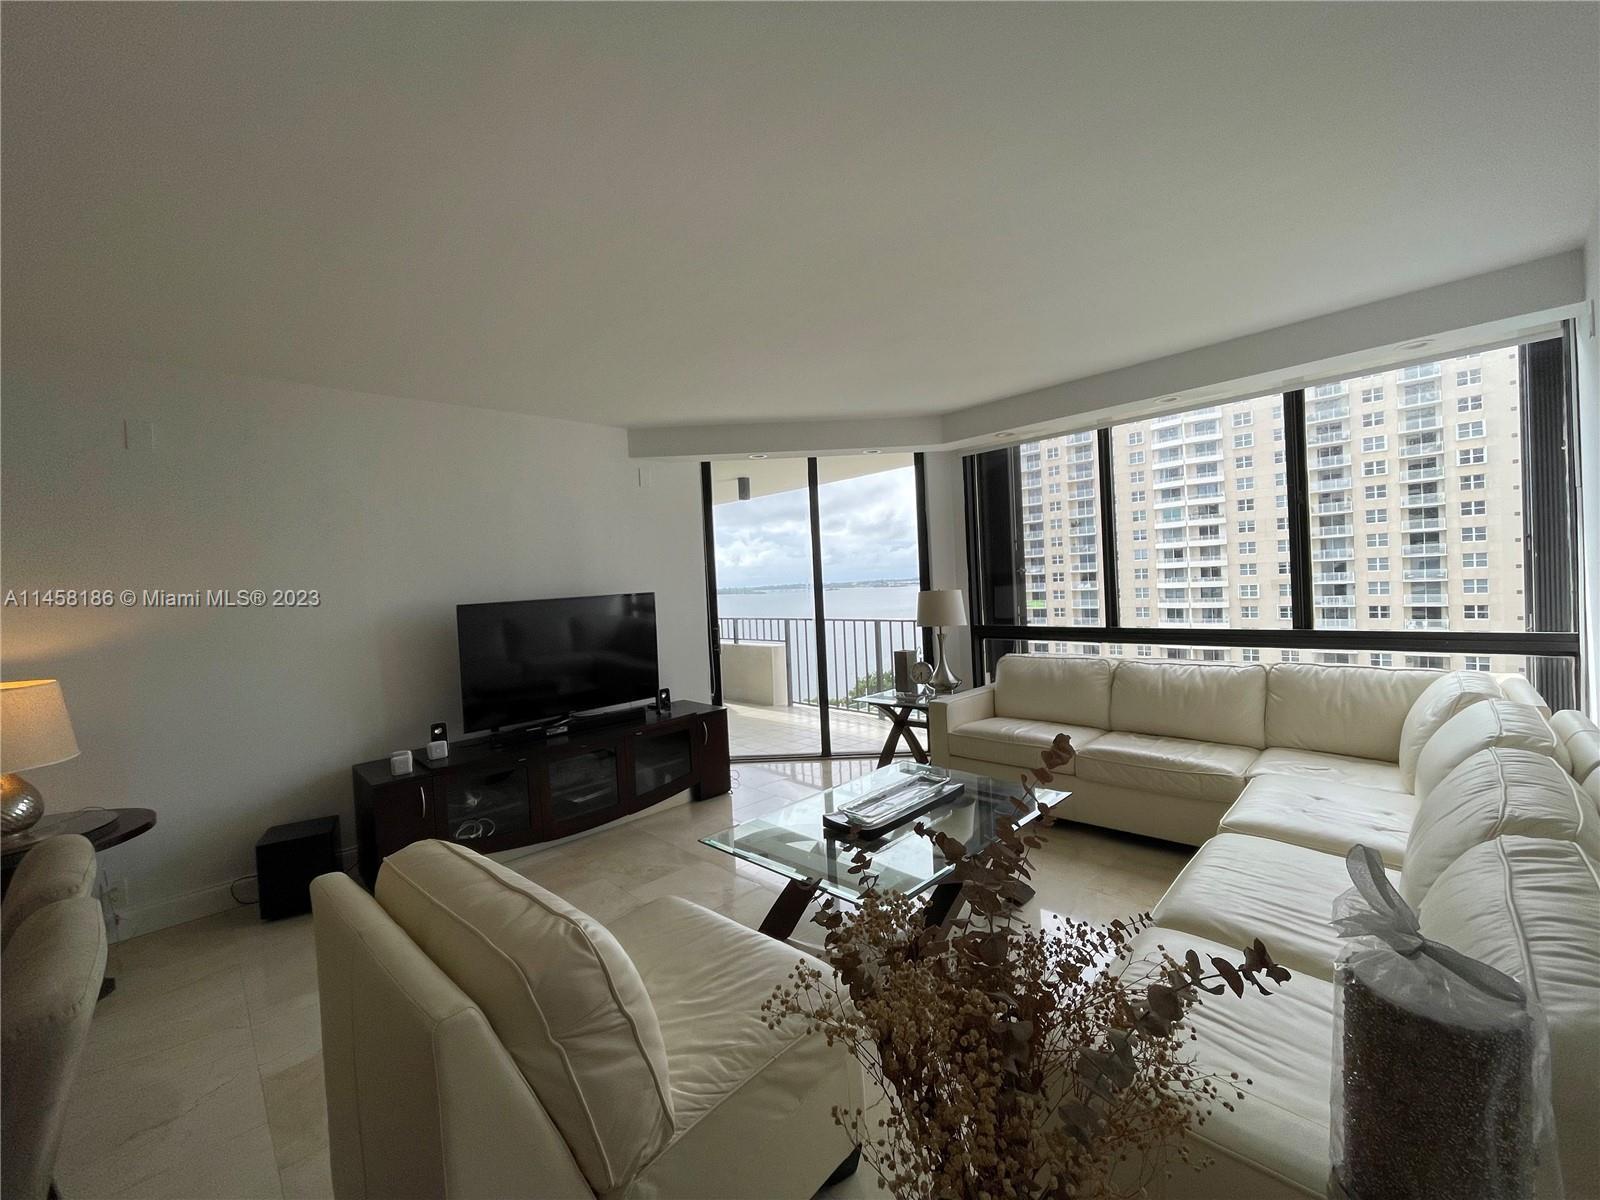 Bright and Spacious 2 Bedrooms/2 Bathrooms in exclusive Brickell Key with marble floors all througho